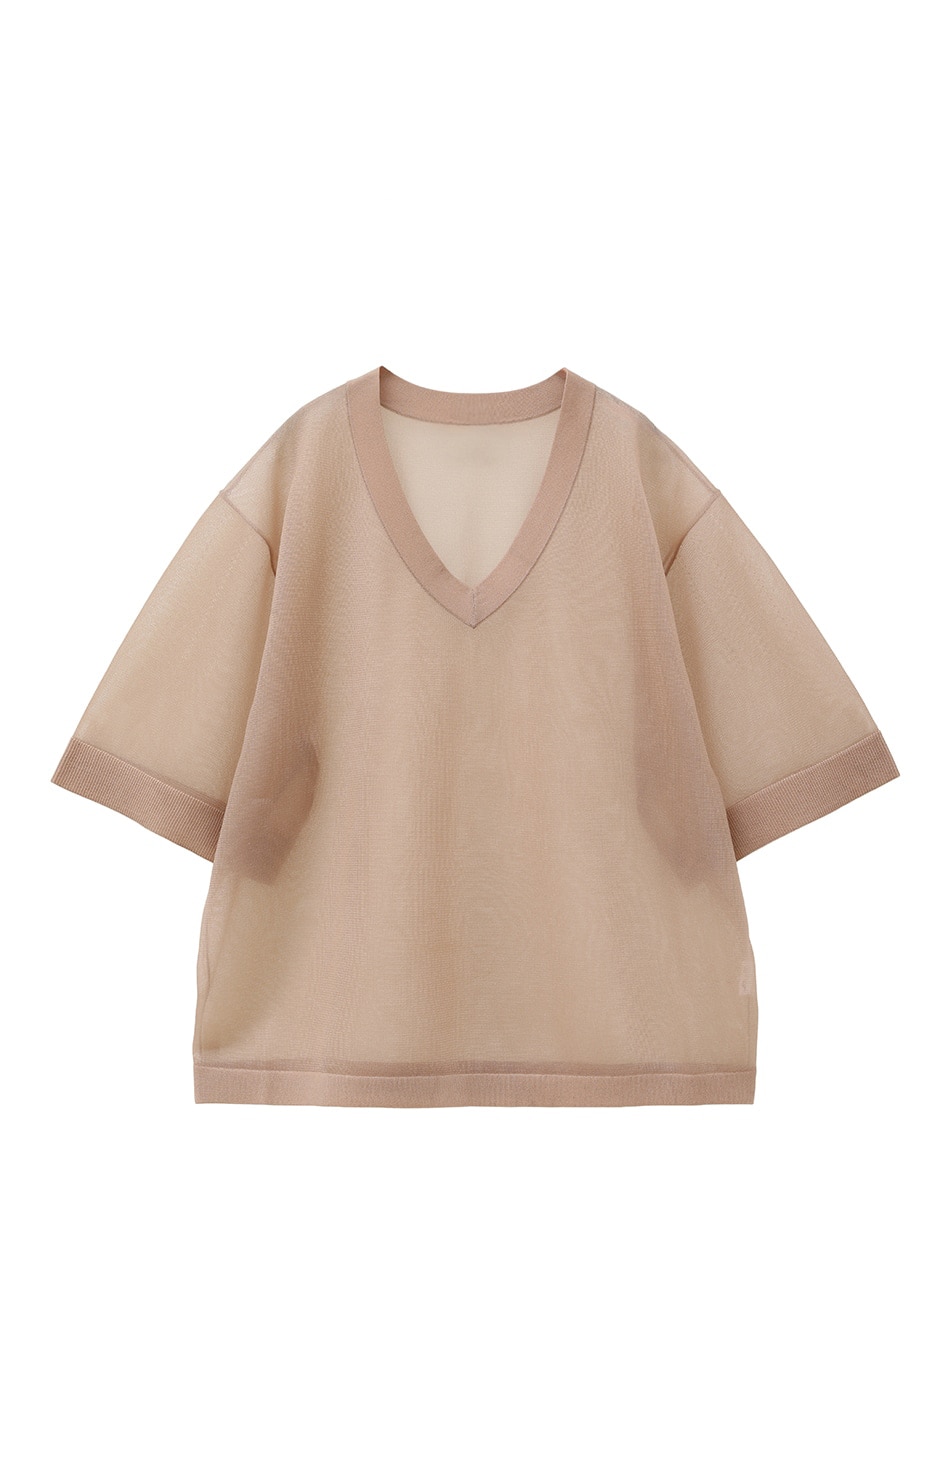 SHEER V NECK KNIT TOPS｜TOPS(トップス)｜CLANE OFFICIAL ONLINE STORE